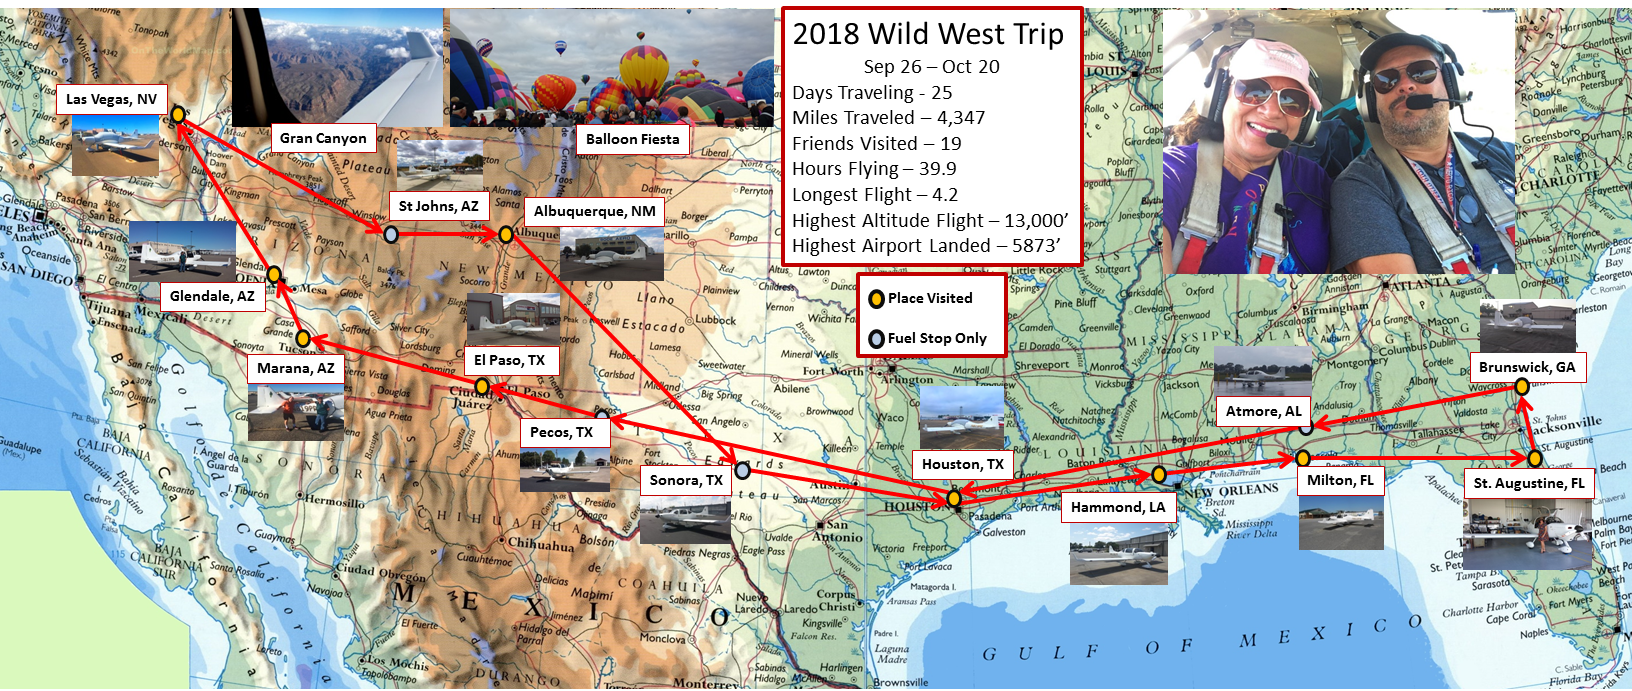 2018_Trip_Map_by_Galin.png